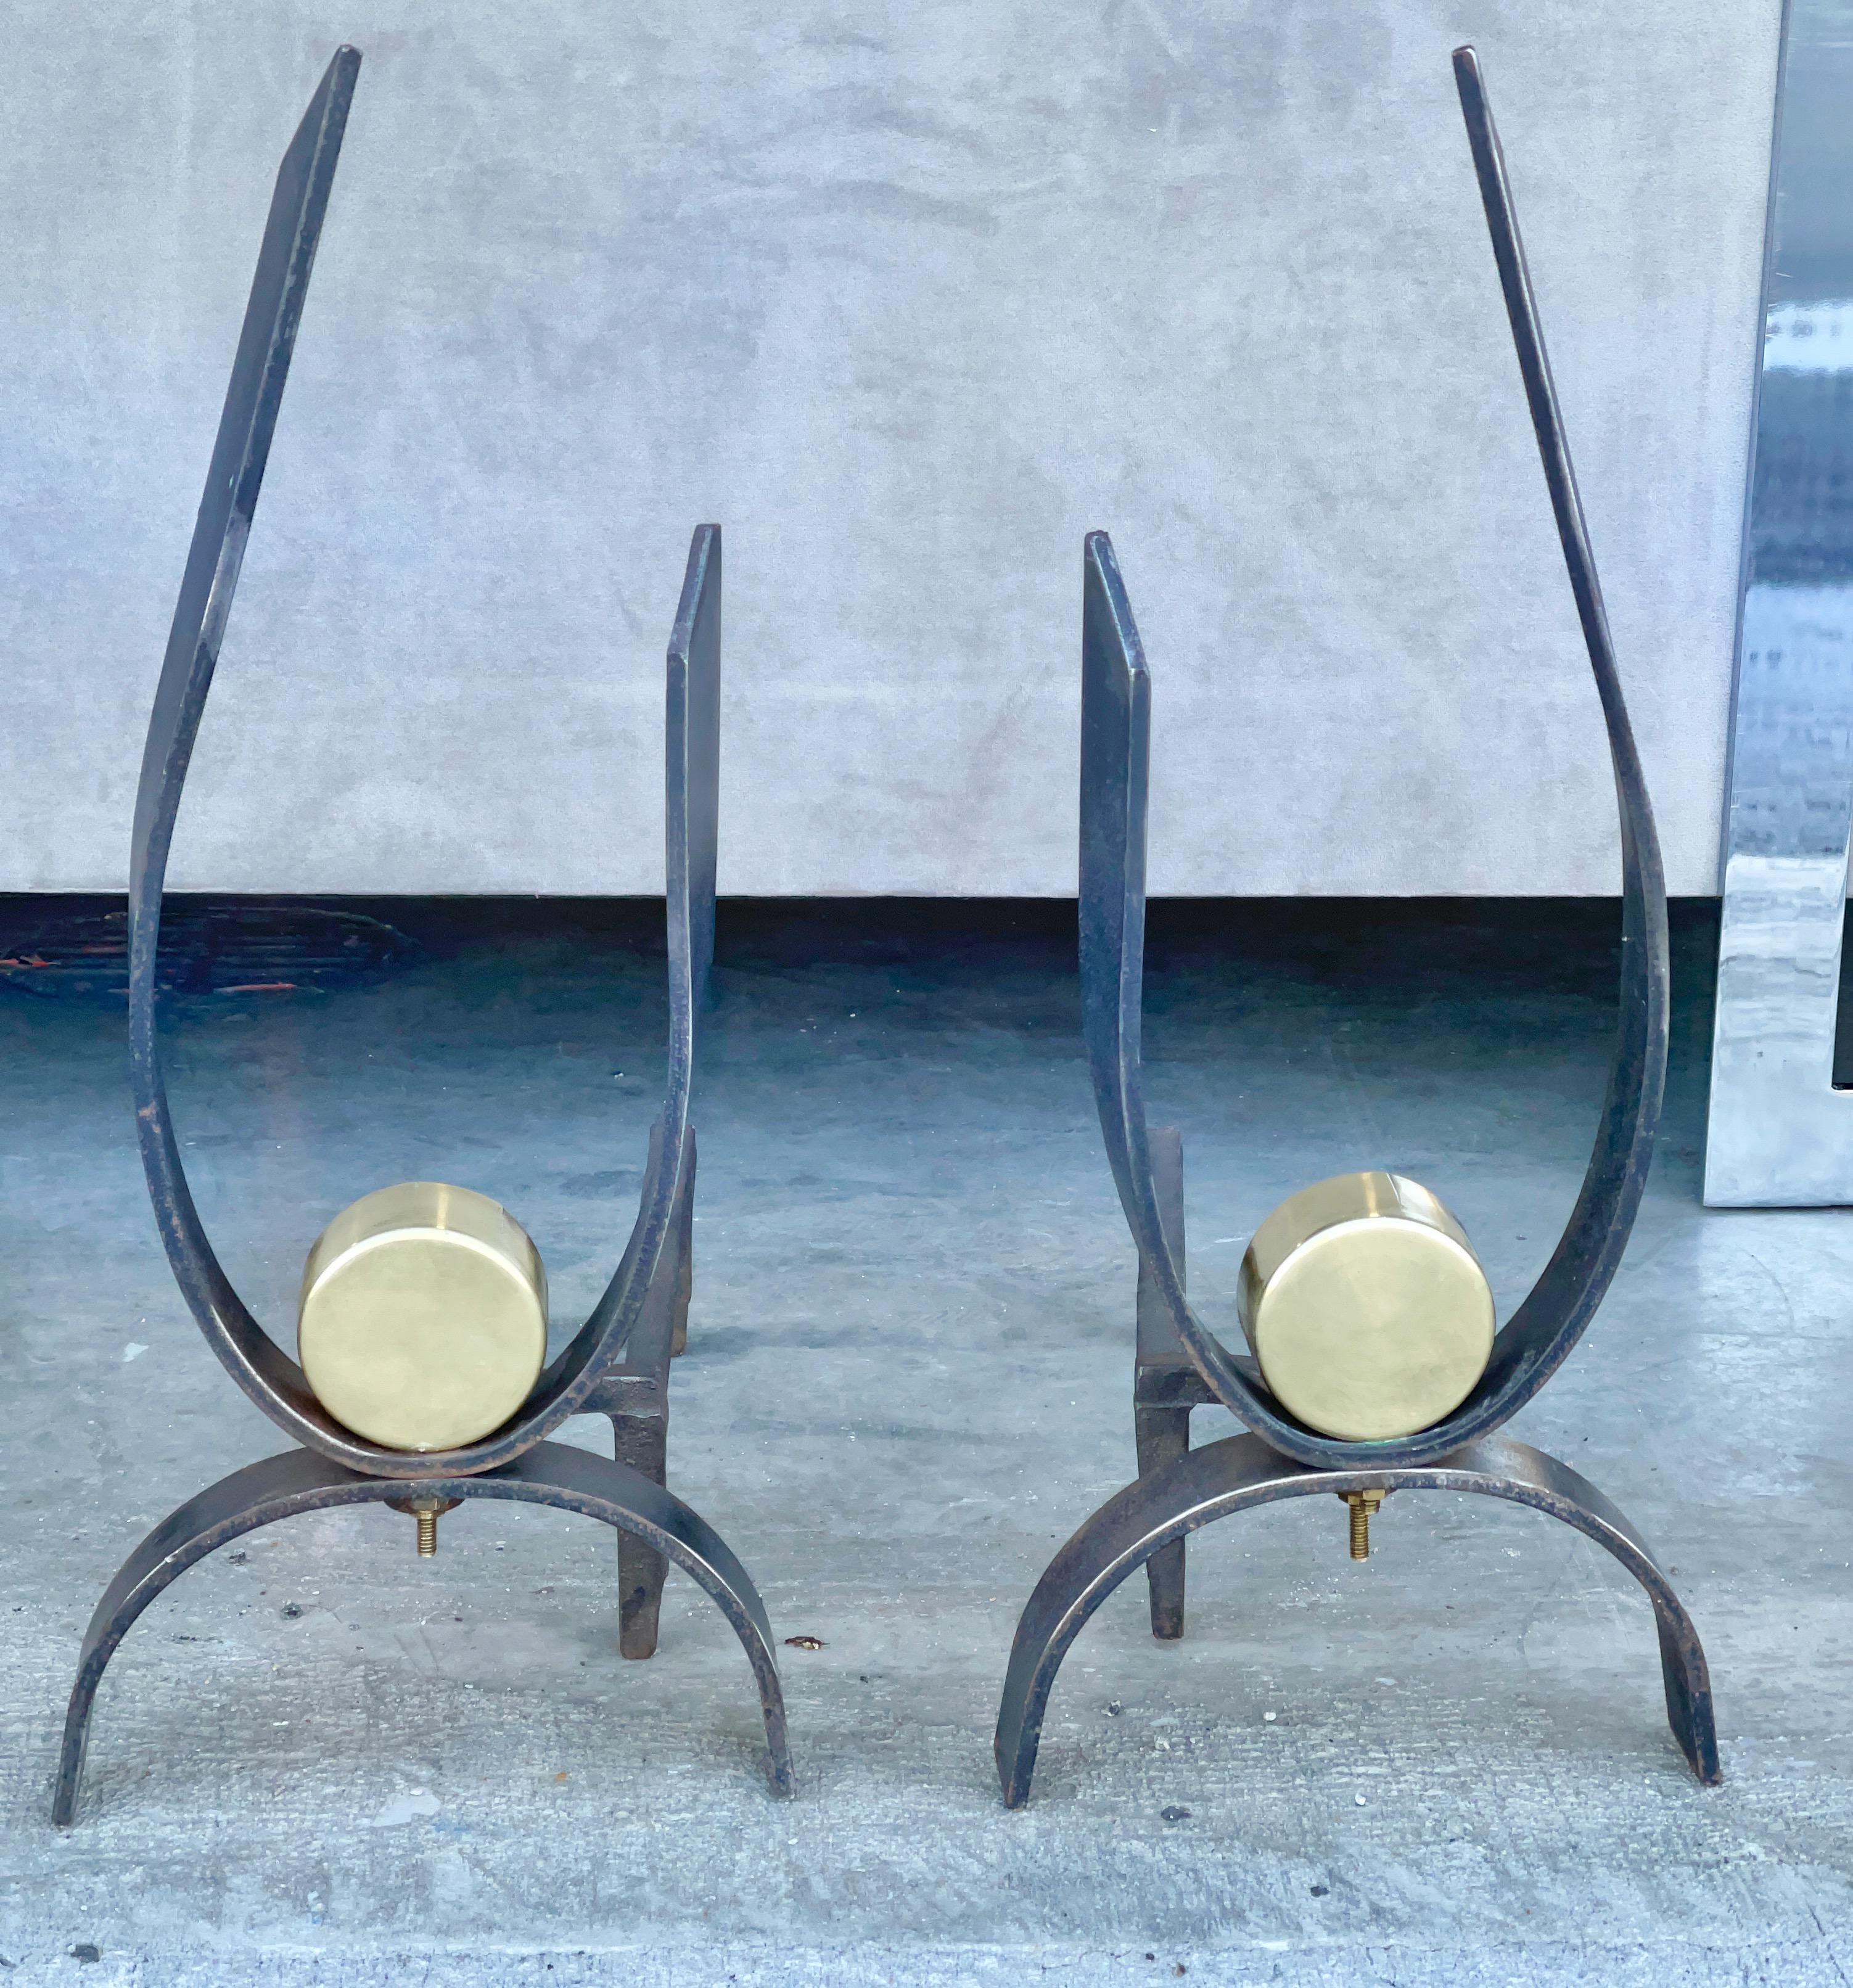 Pair of fireplace andirons designed by Donald Deskey circa 1950 for Bennett.
Sculpturally cut and formed forged blackened iron J swoops (aligned for left and right) embellished with a round brass puck sized ornaments, standing on symmetrical arched